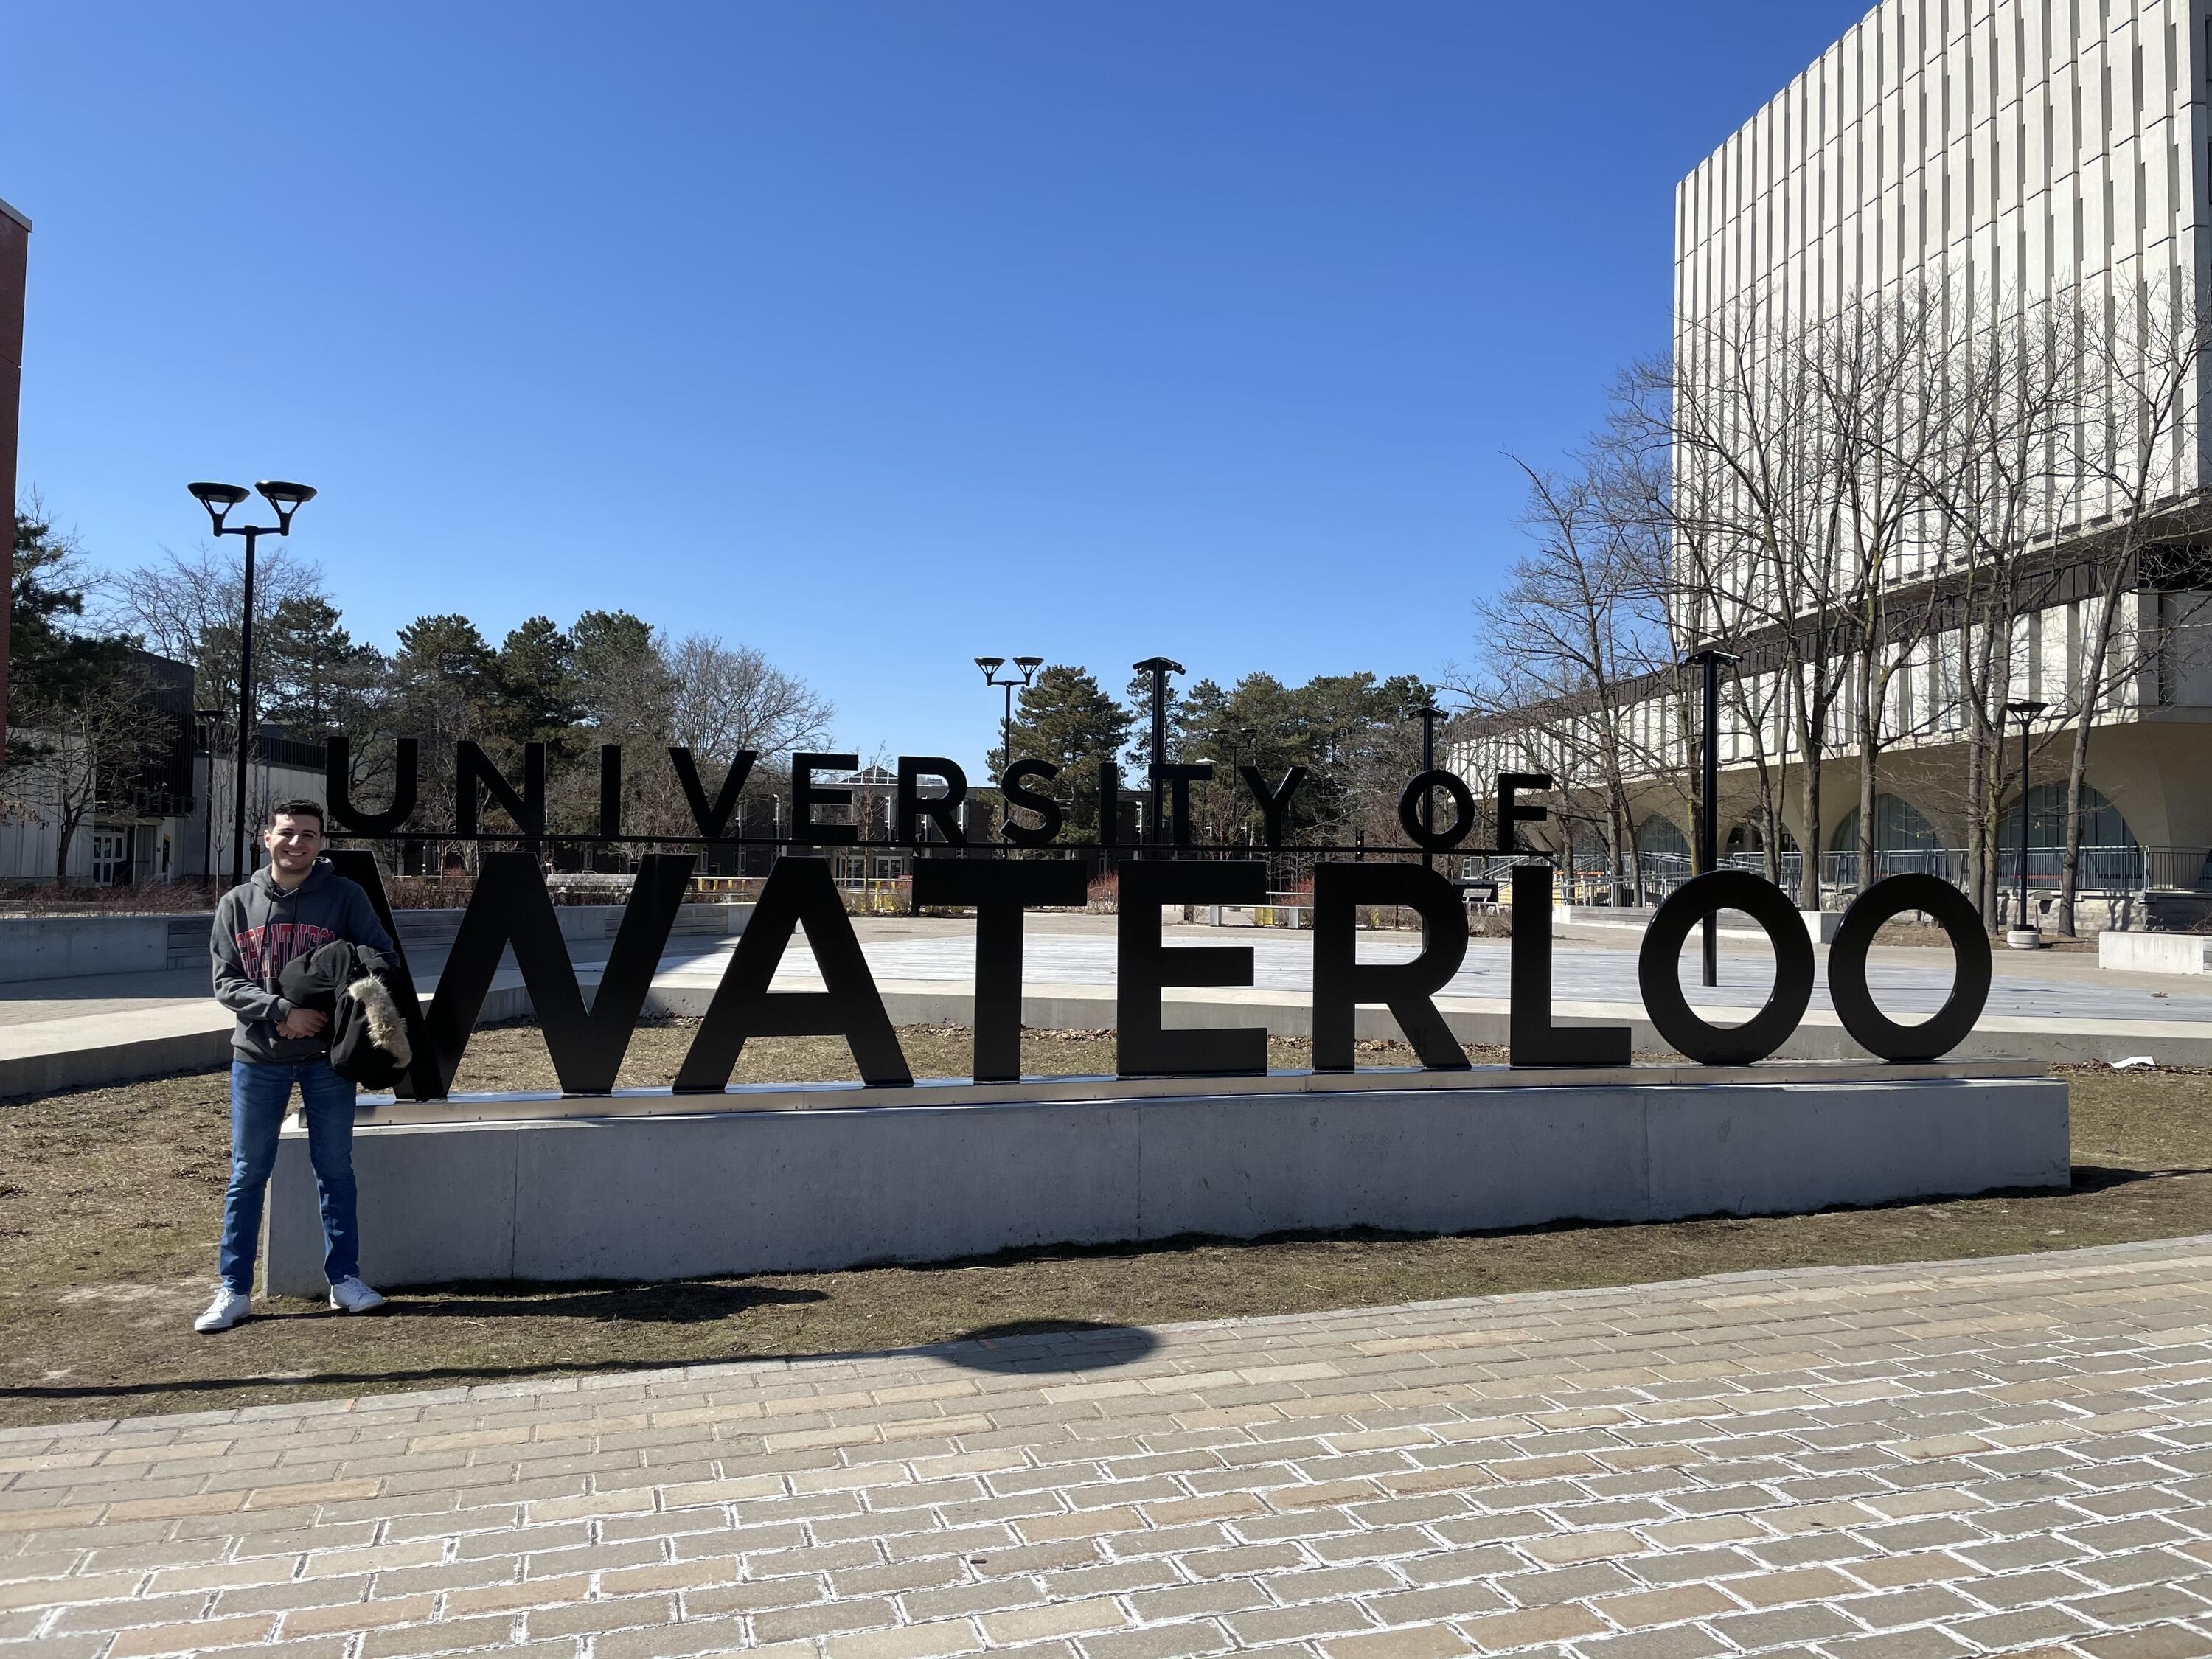 Souhail posing next to the University of Waterloo sign 